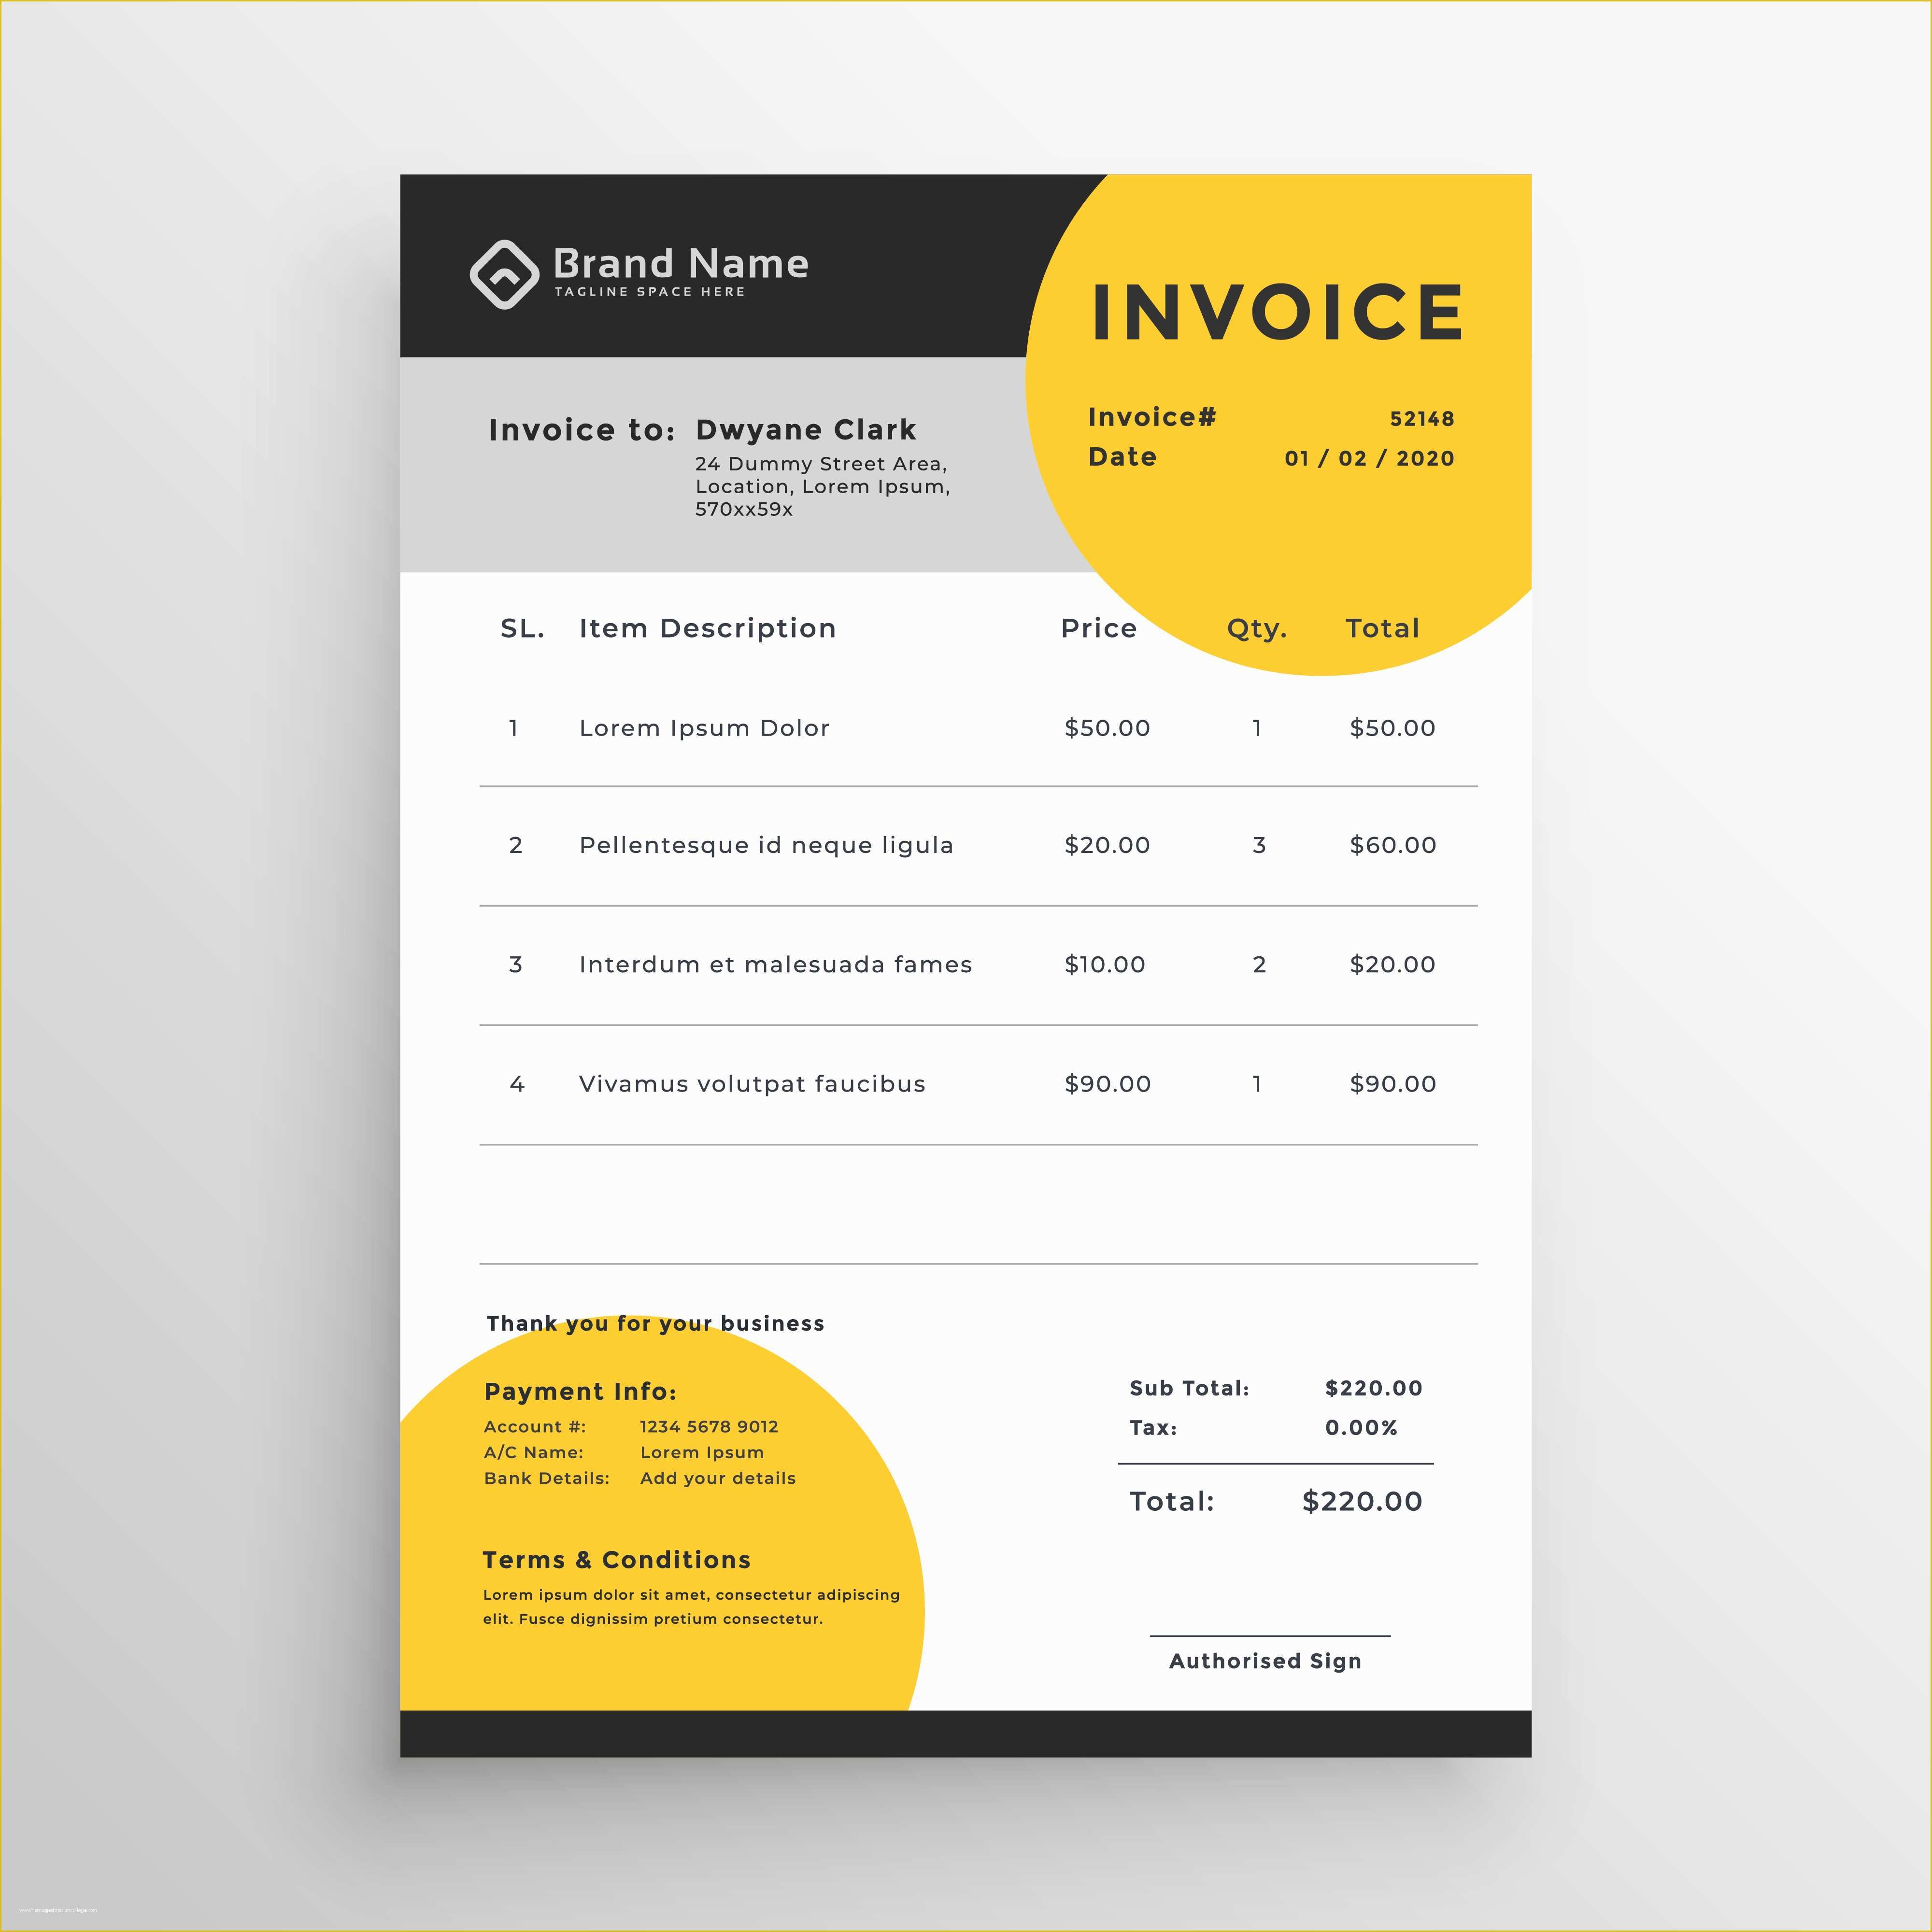 Creative Invoice Template Free Download Of Professional Creative Vector Invoice Template Design